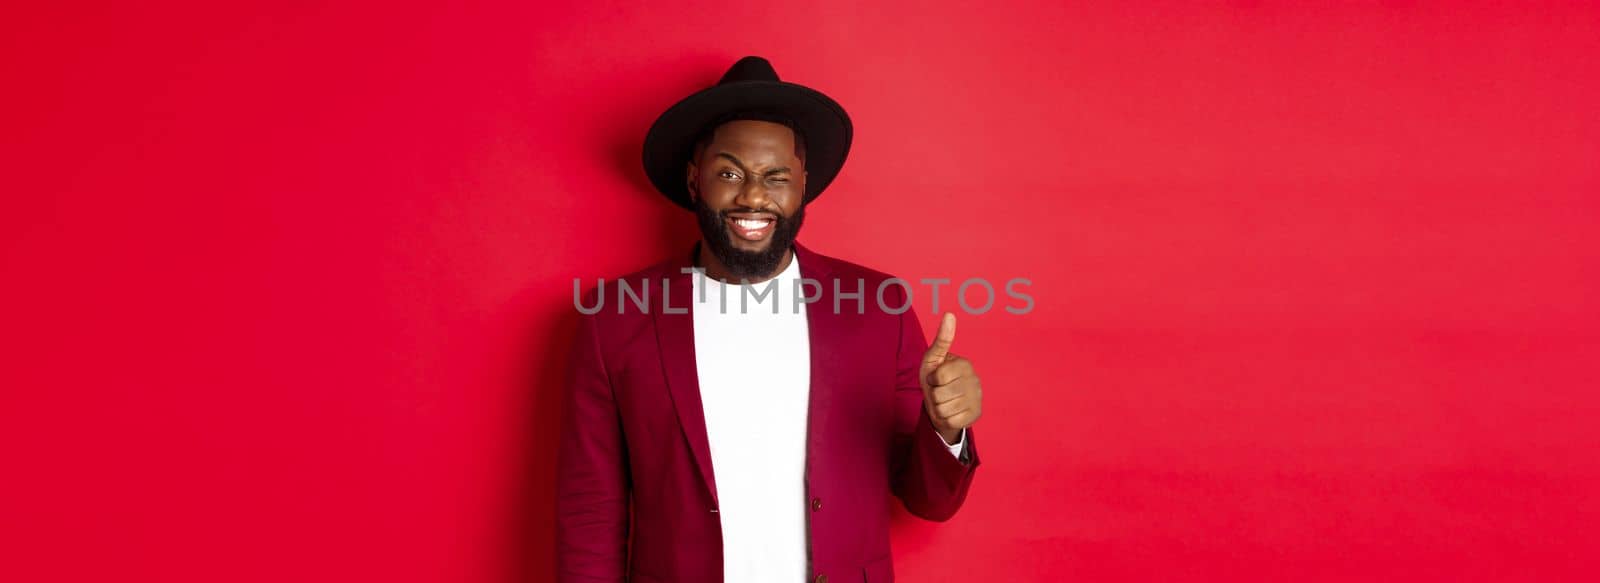 Christmas shopping and people concept. Handsome bearded Black man in party blazer showing thumb up, winking and smiling at camera, recommending promo, red background.